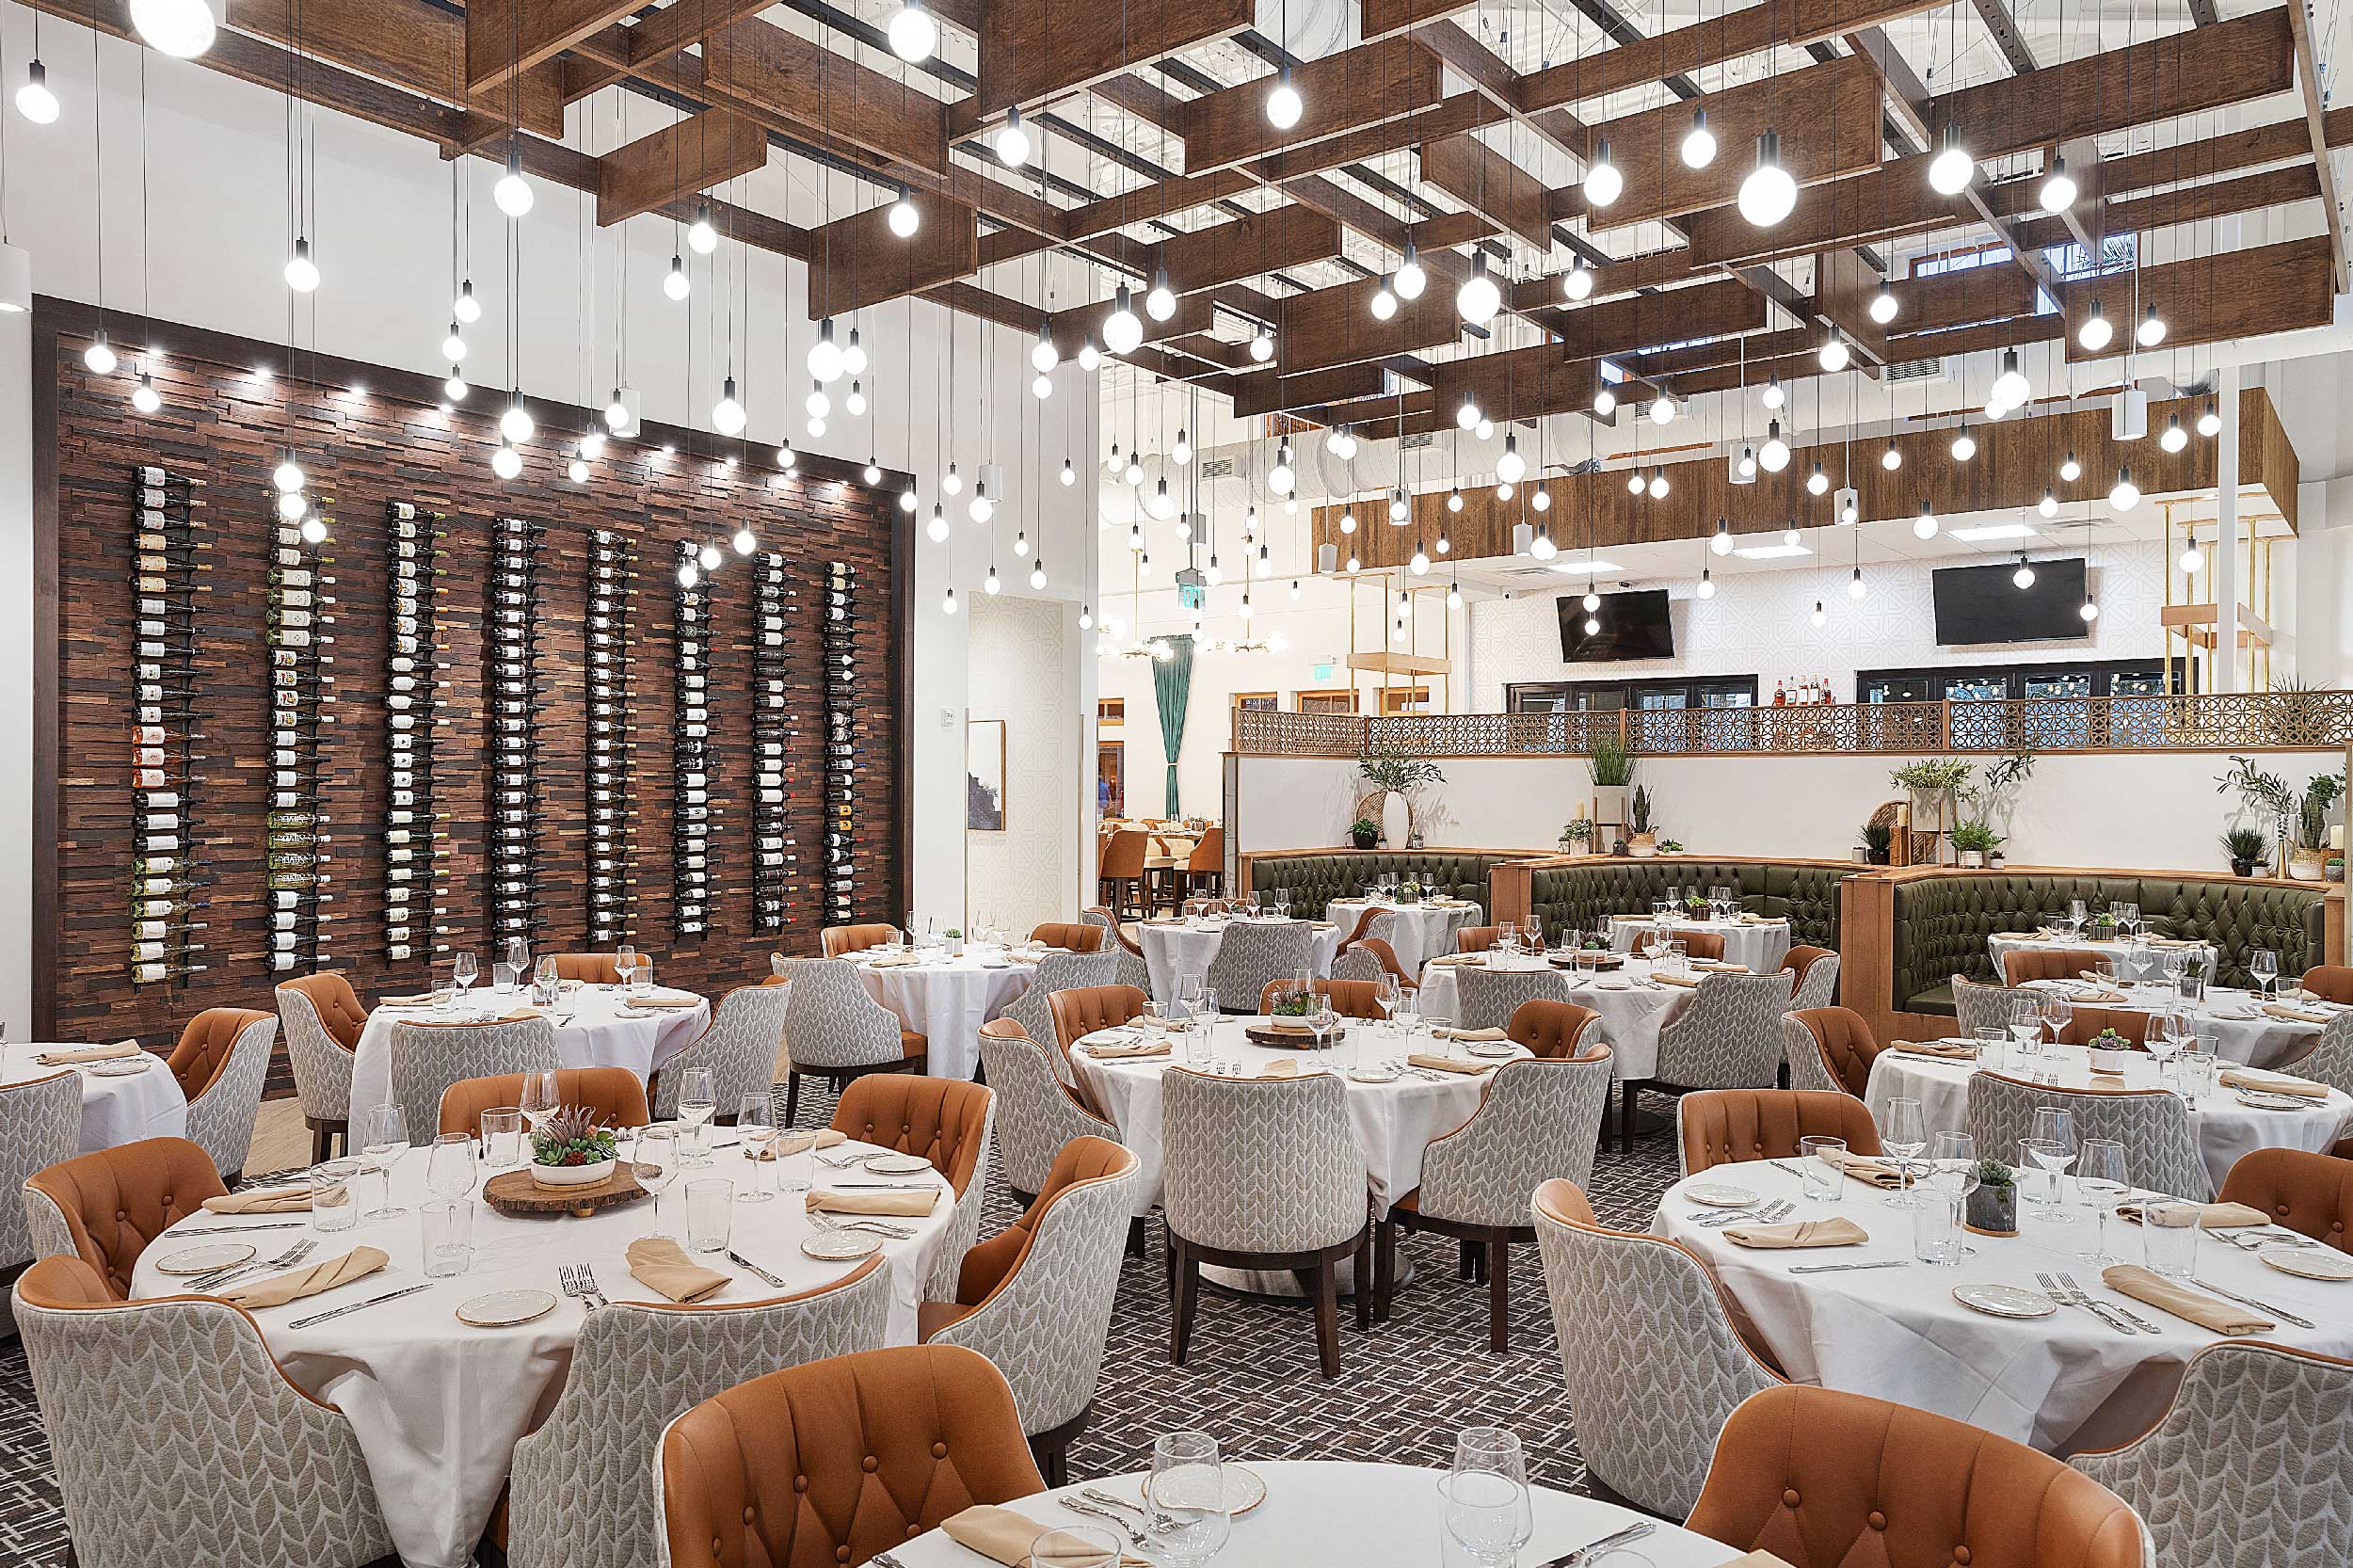 Harvest Restaurant interior main dining area with tables set with chairs and wine bottle wall, hanging light fixtures